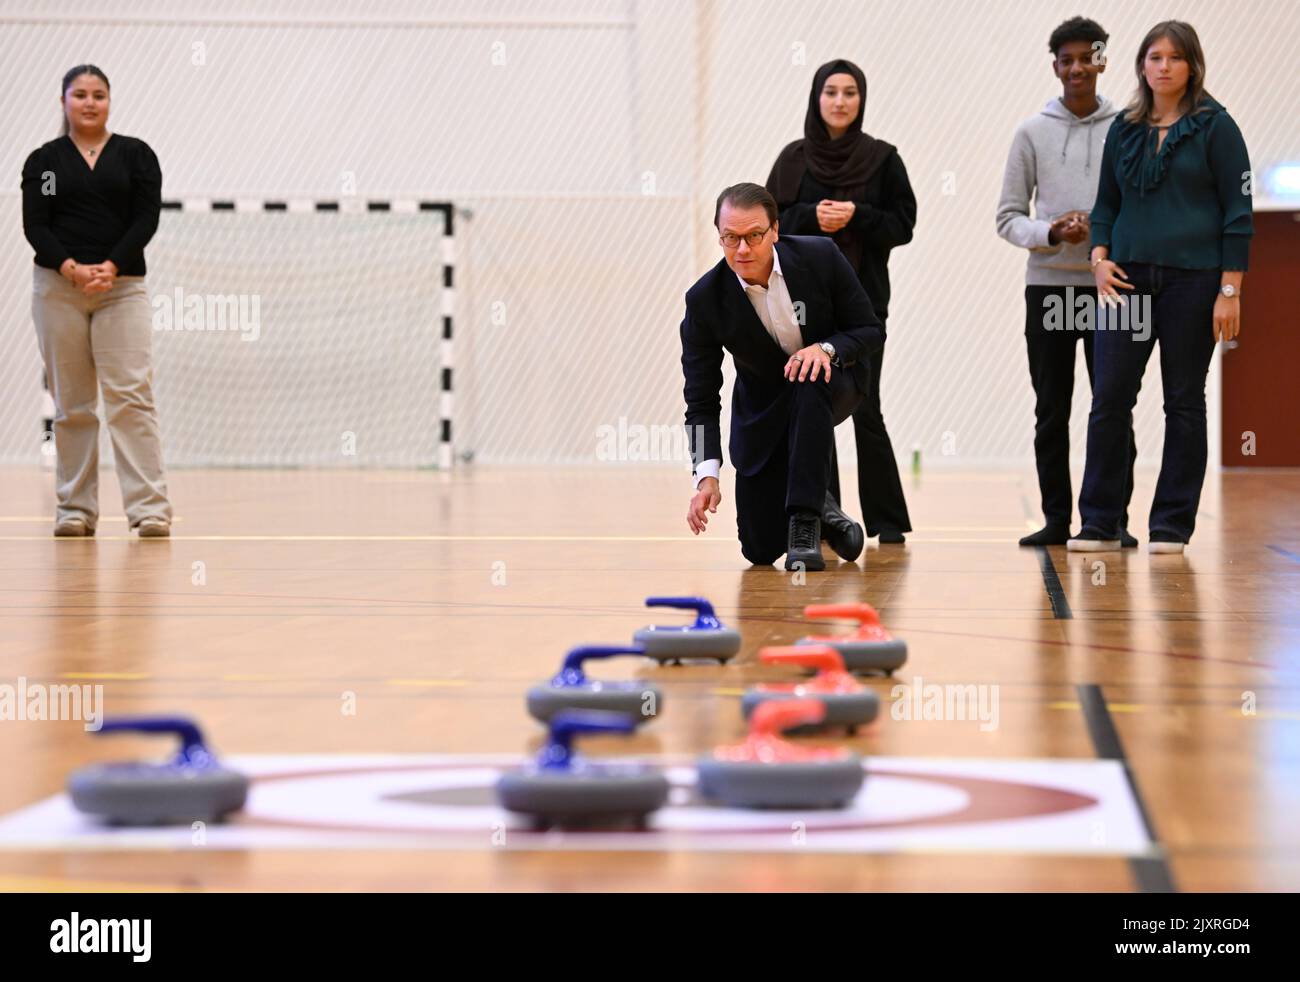 Stockholm, Sweden. 07th Sep, 2022. Prince Daniel tries Floor-curlingl during the visit to Steninge school who use Fritidsbanken (leisure bank), where children can borrow equipment for leisure activities for free, in Sigtuna, Sweden, on September 07, 2022. Photo: Fredrik Sandberg/TT/code 10080 Credit: TT News Agency/Alamy Live News Stock Photo